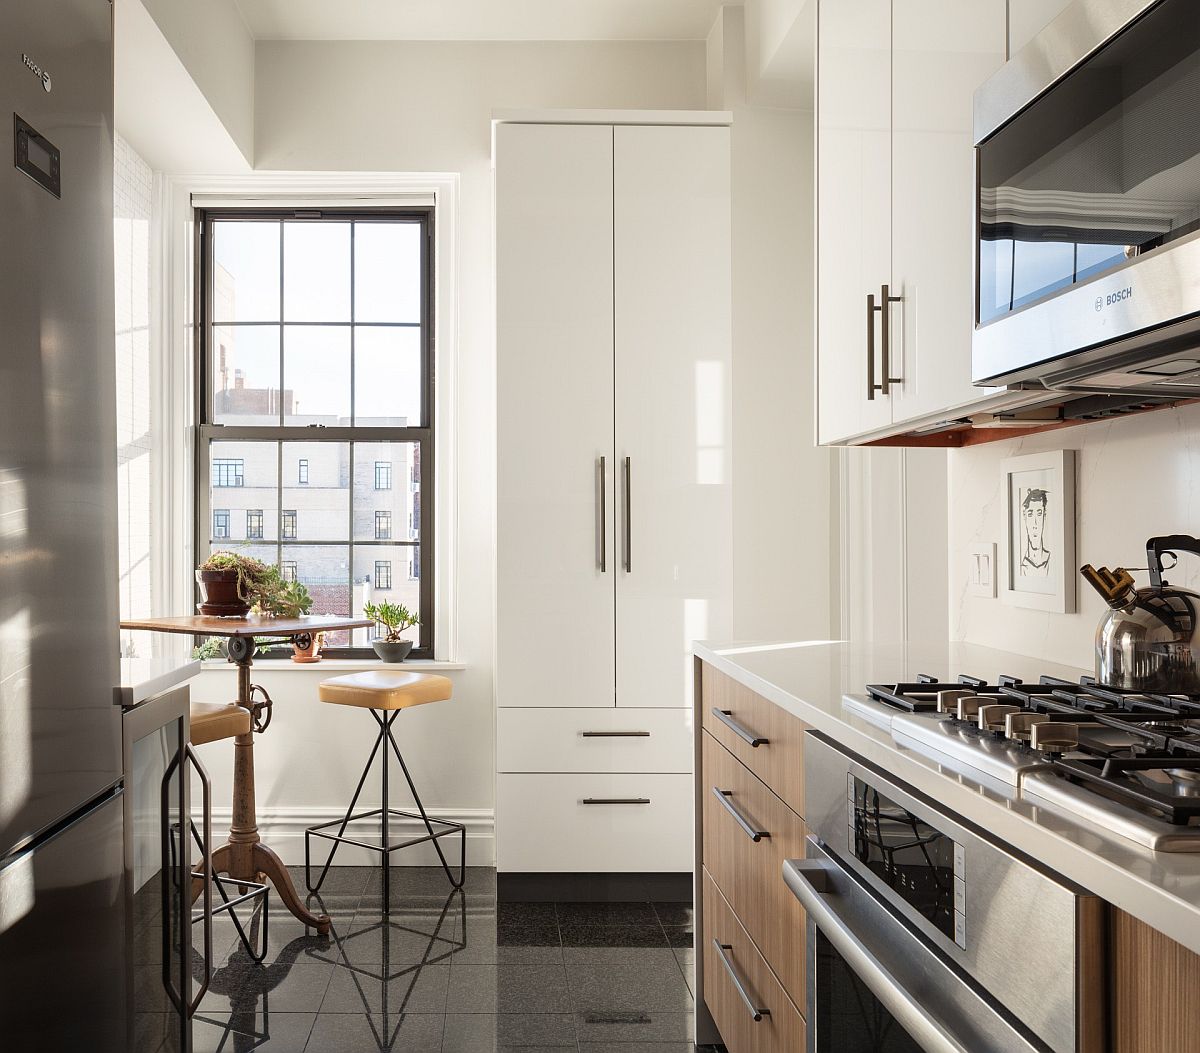 20 Best Small Kitchens from New York City that Inspire with Creativity